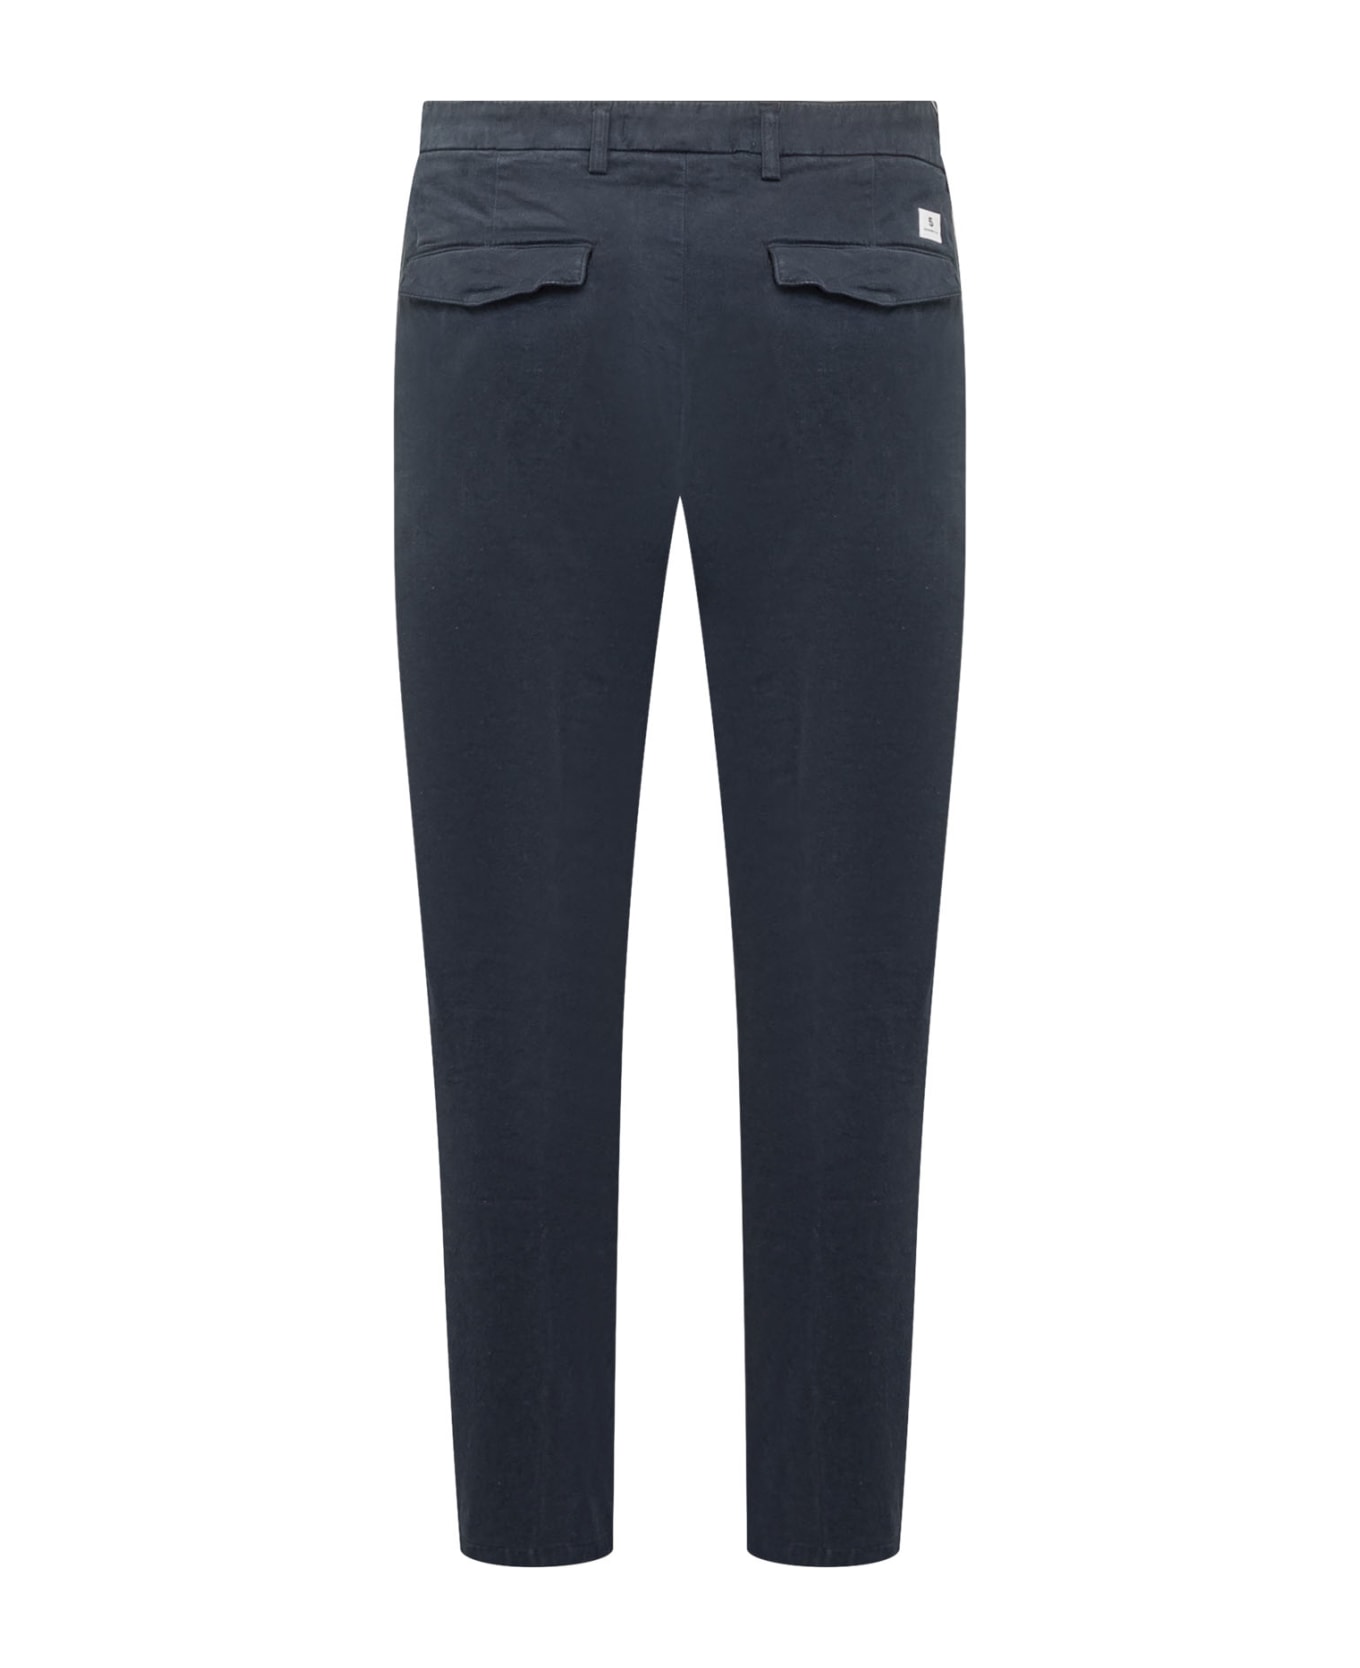 Department Five Prince Trousers Chinos - NAVY